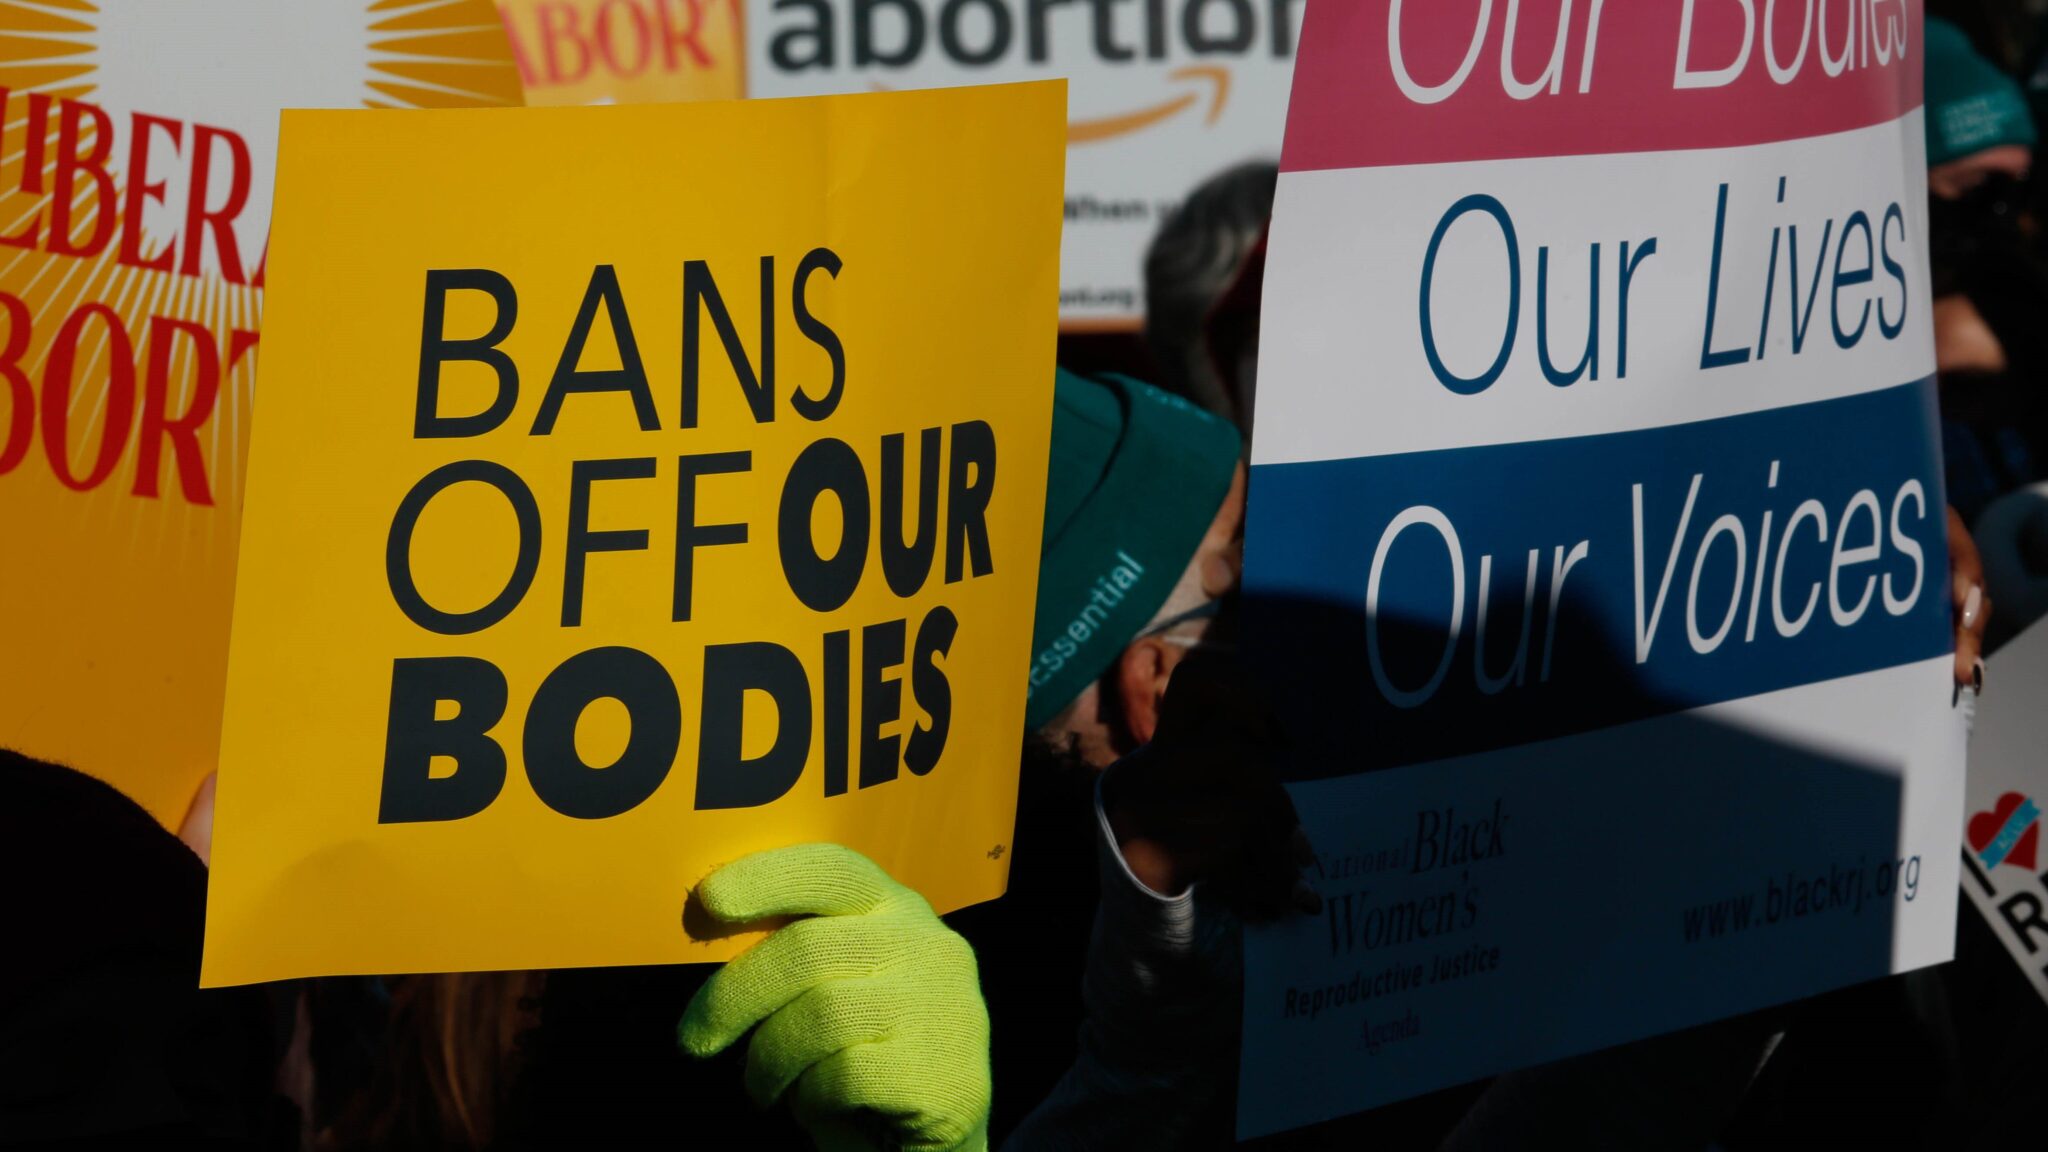 bans-off-our-bodies-rally-sign-scaled-aspect-ratio-16-9